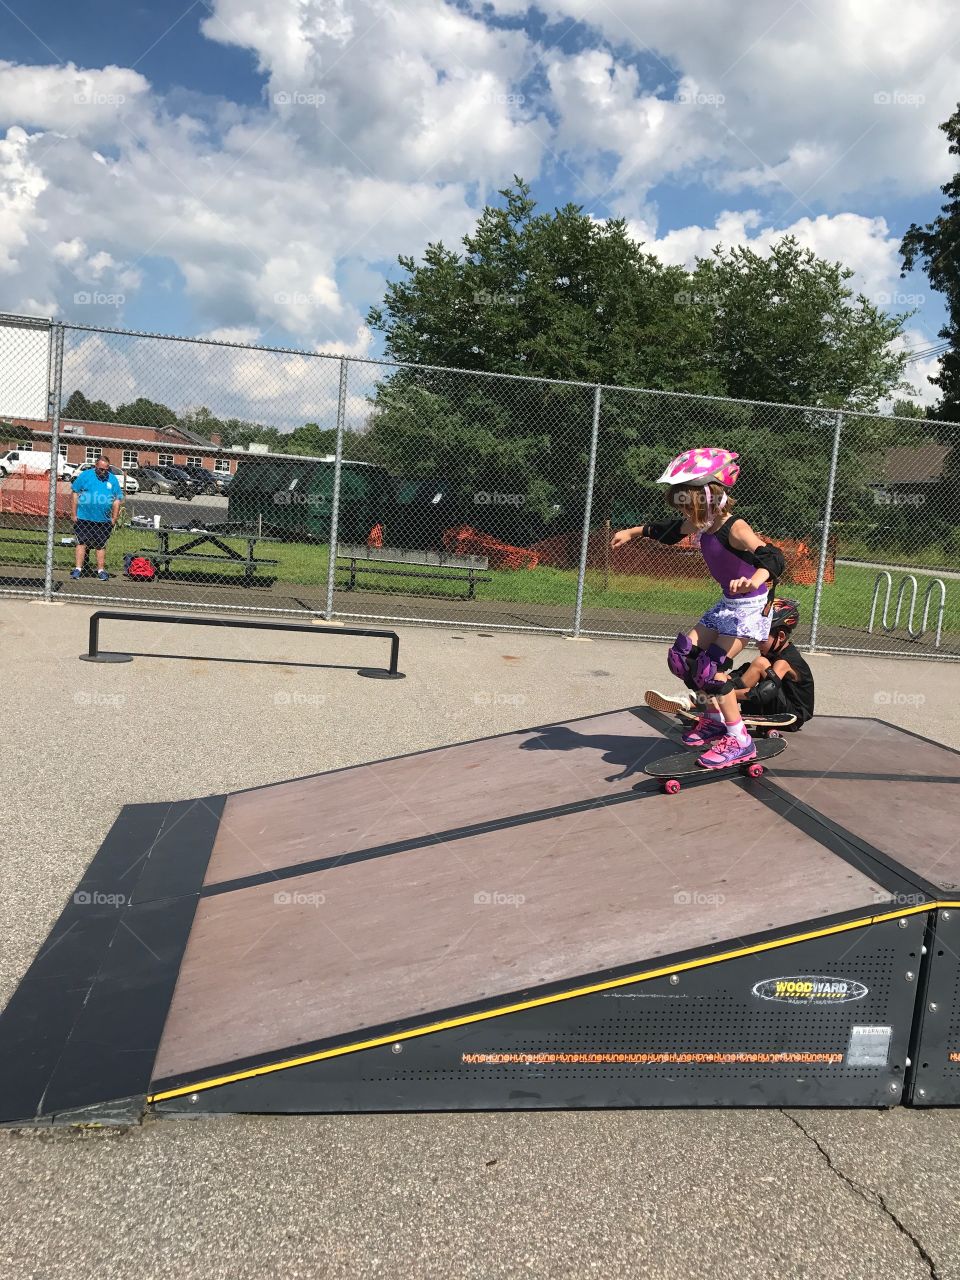 KBrave girl skateboarding on ramp in skate park with pink safety gear and brother sitting next to her to cheer her on.